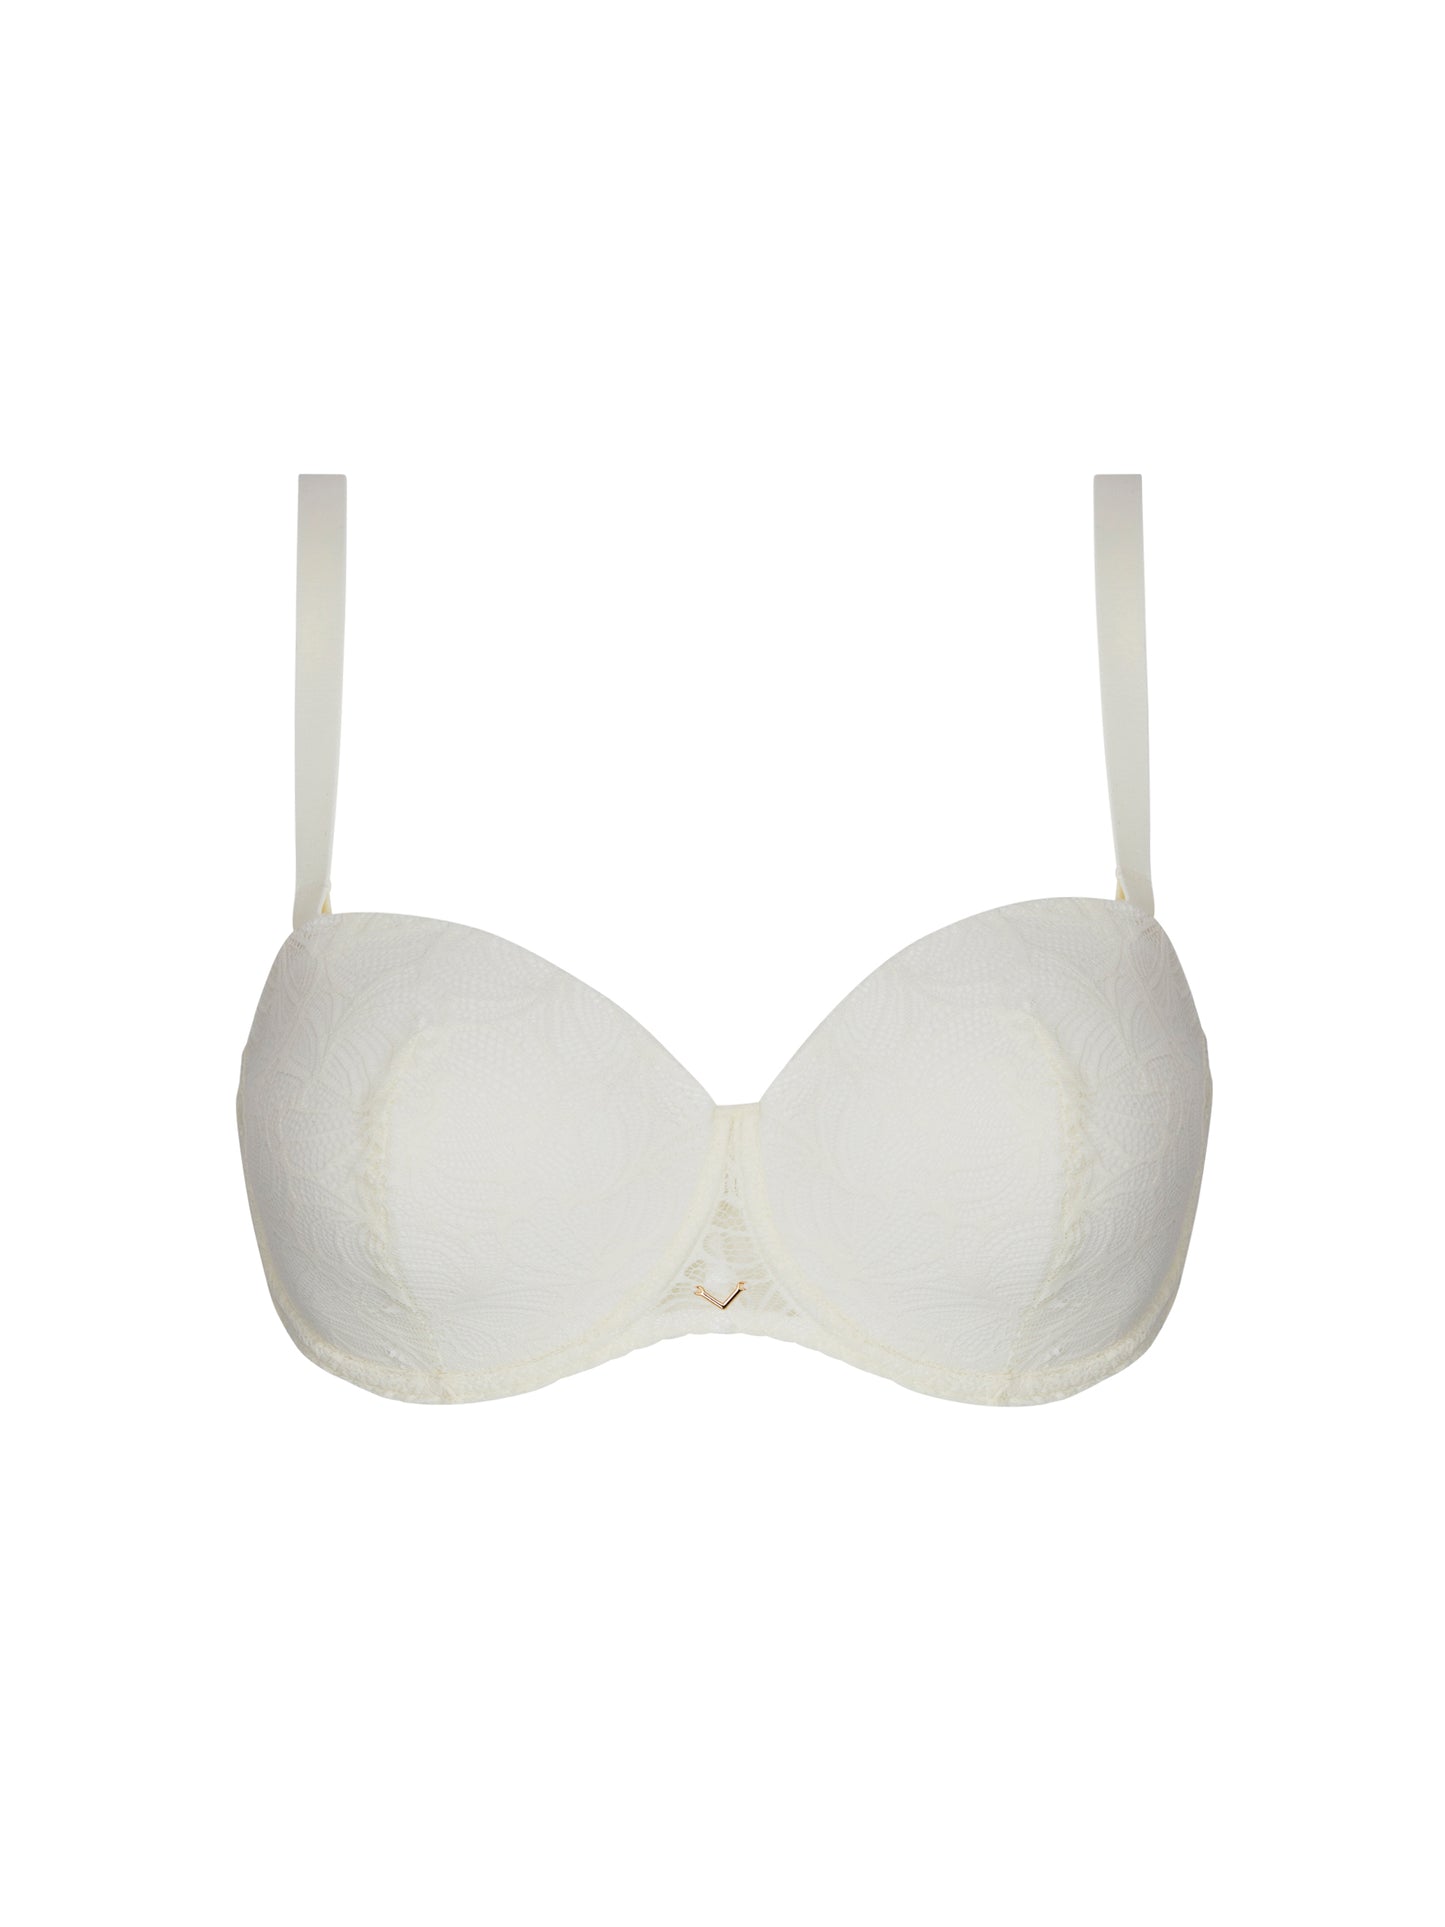 Atelier Séduction Bandeau Convertible Bra By Antigel in Ivory - 32-40 B-F (EURO sizes)